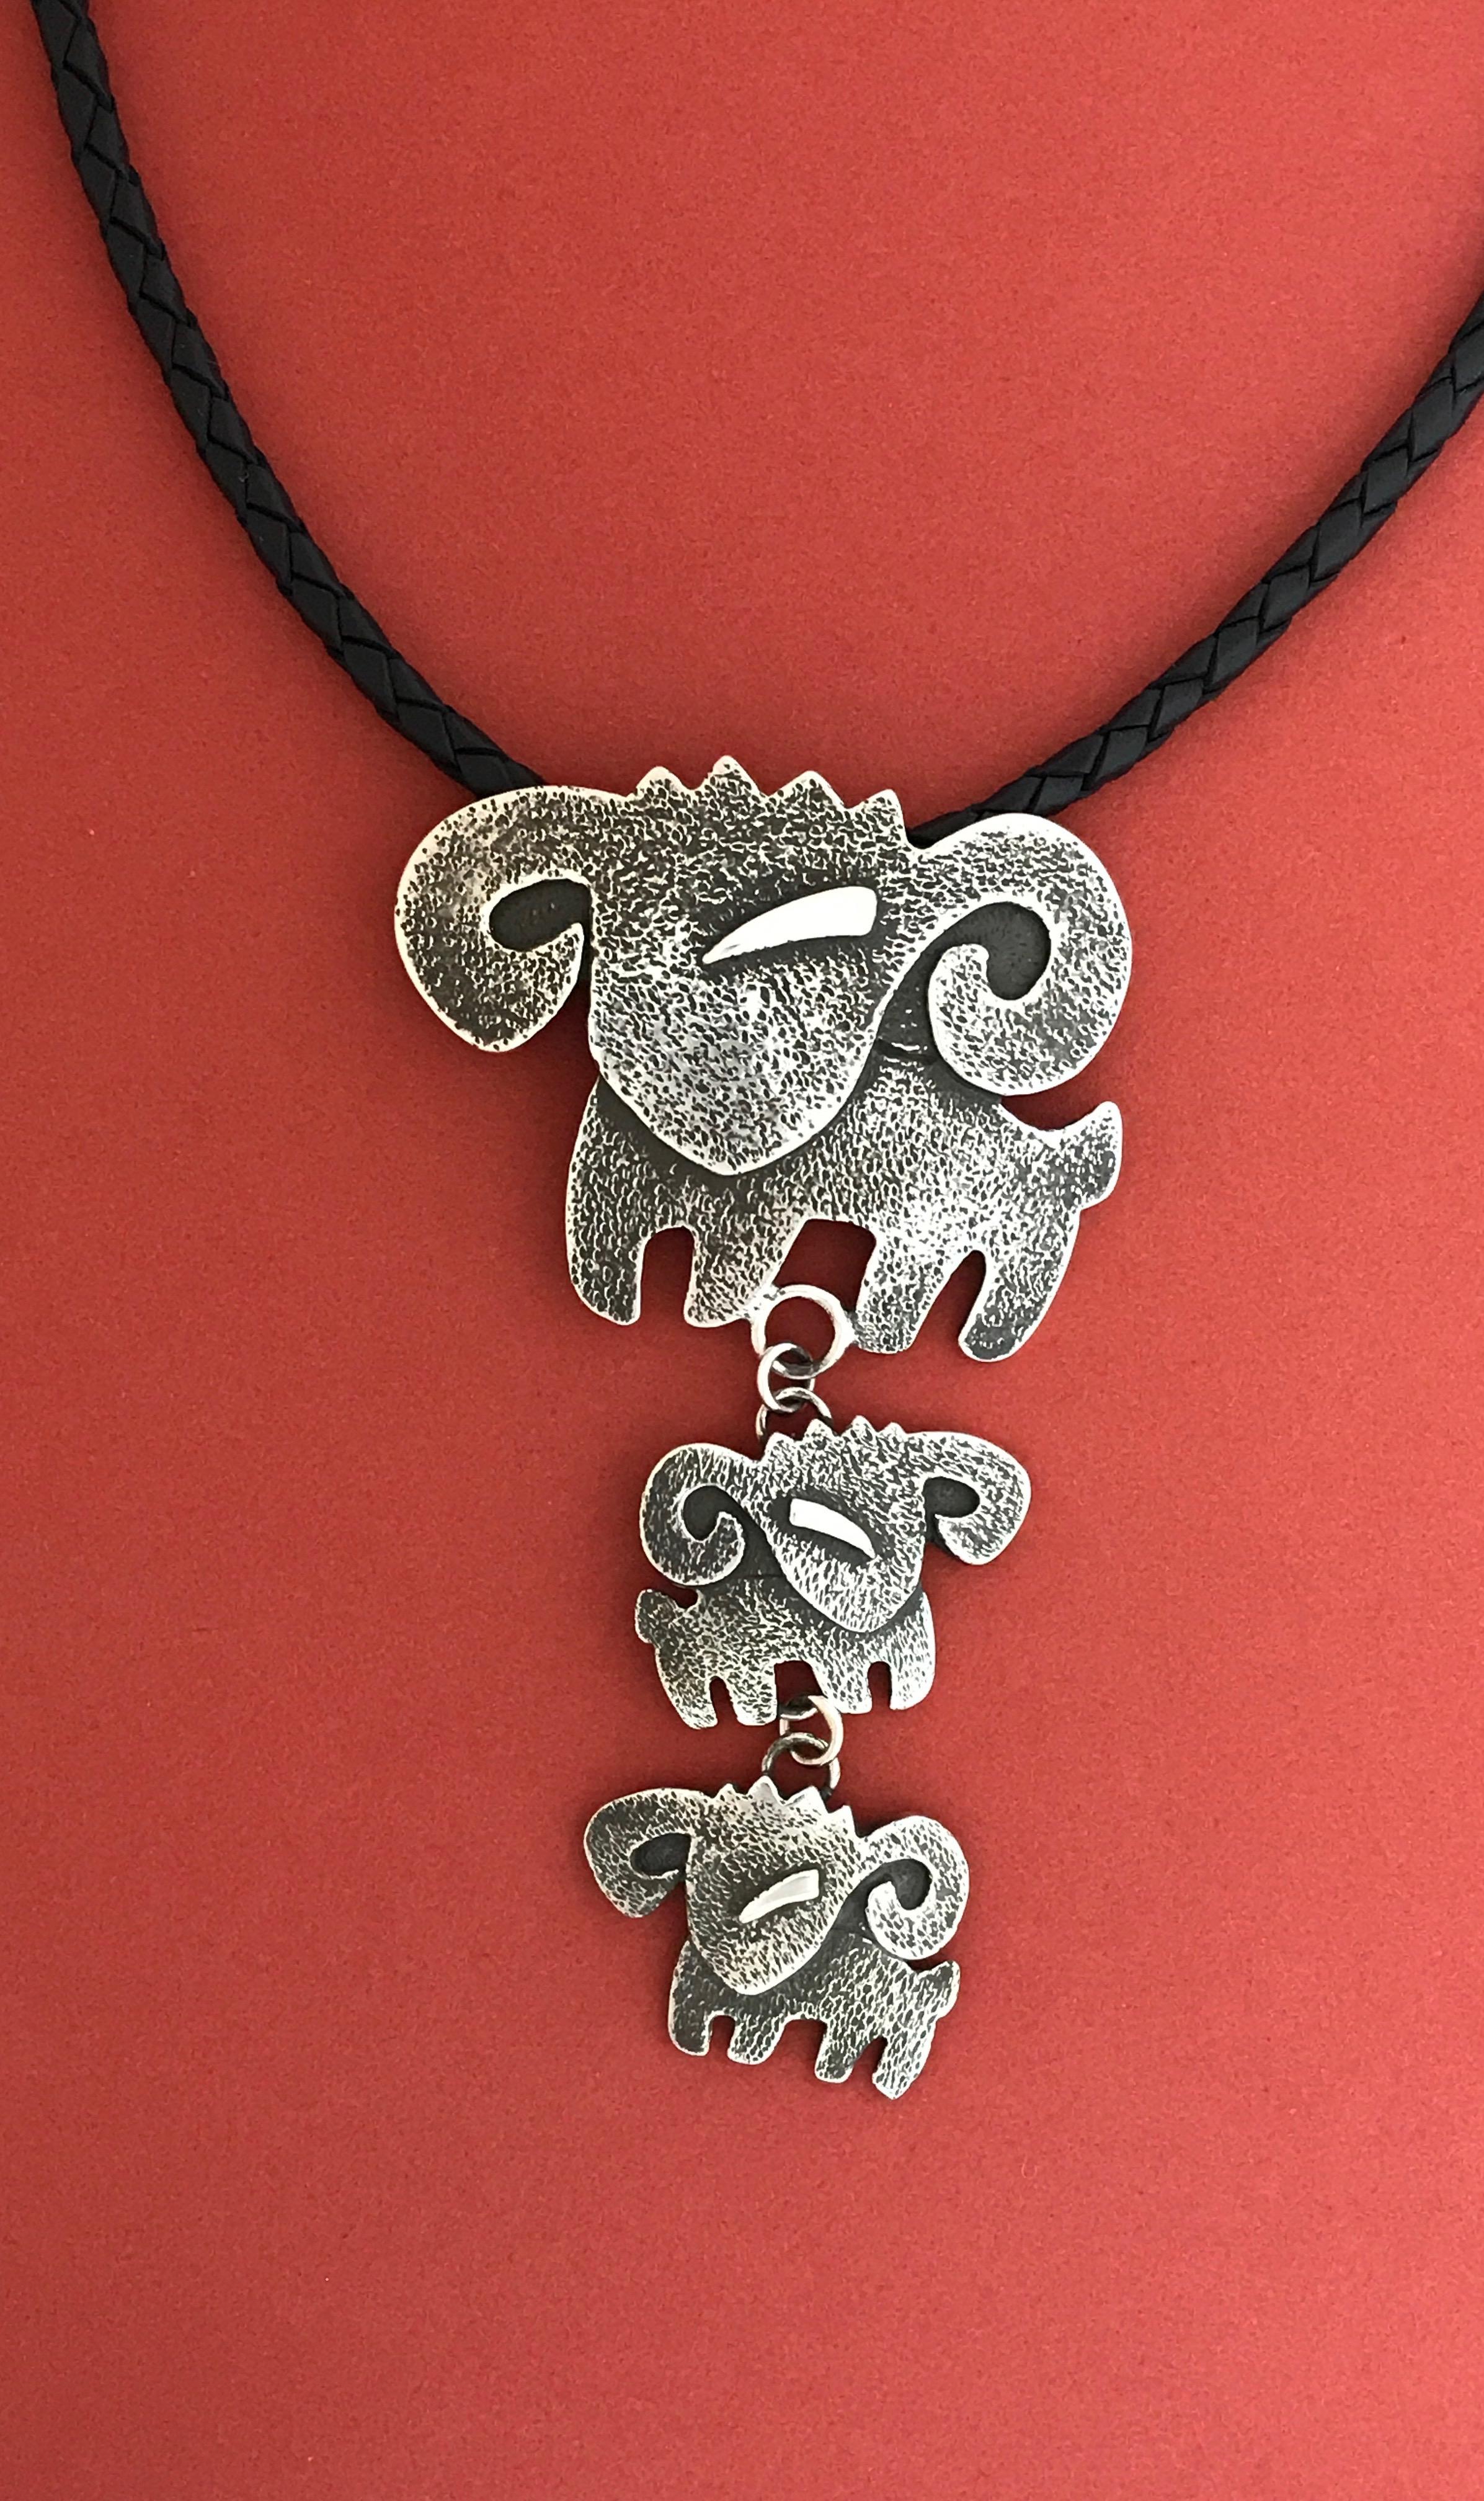 Rams, cast sterling silver pendant Melanie Yazzie new Navajo necklace aries

Melanie A. Yazzie (Navajo-Diné) is a highly regarded multimedia artist known for her printmaking, paintings, sculpture, and jewelry designs.  She has exhibited, lectured,